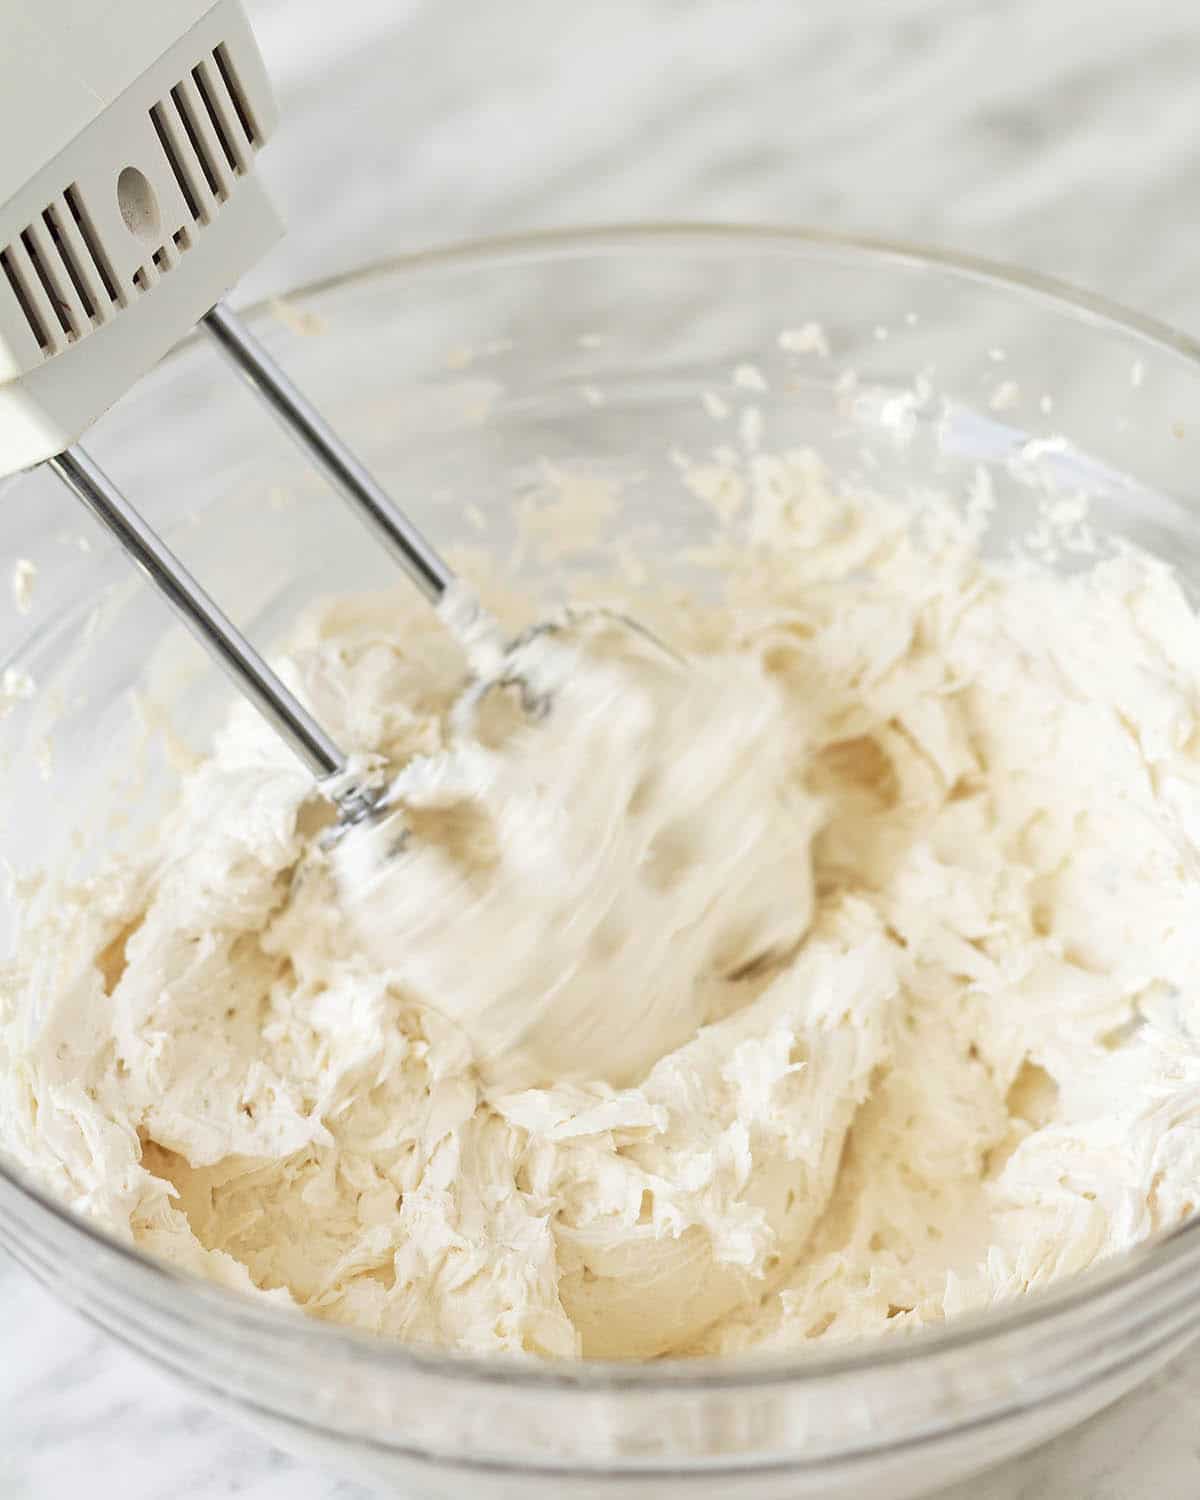 Image shows an electric beater whipping vanilla frosting in a glass bowl.